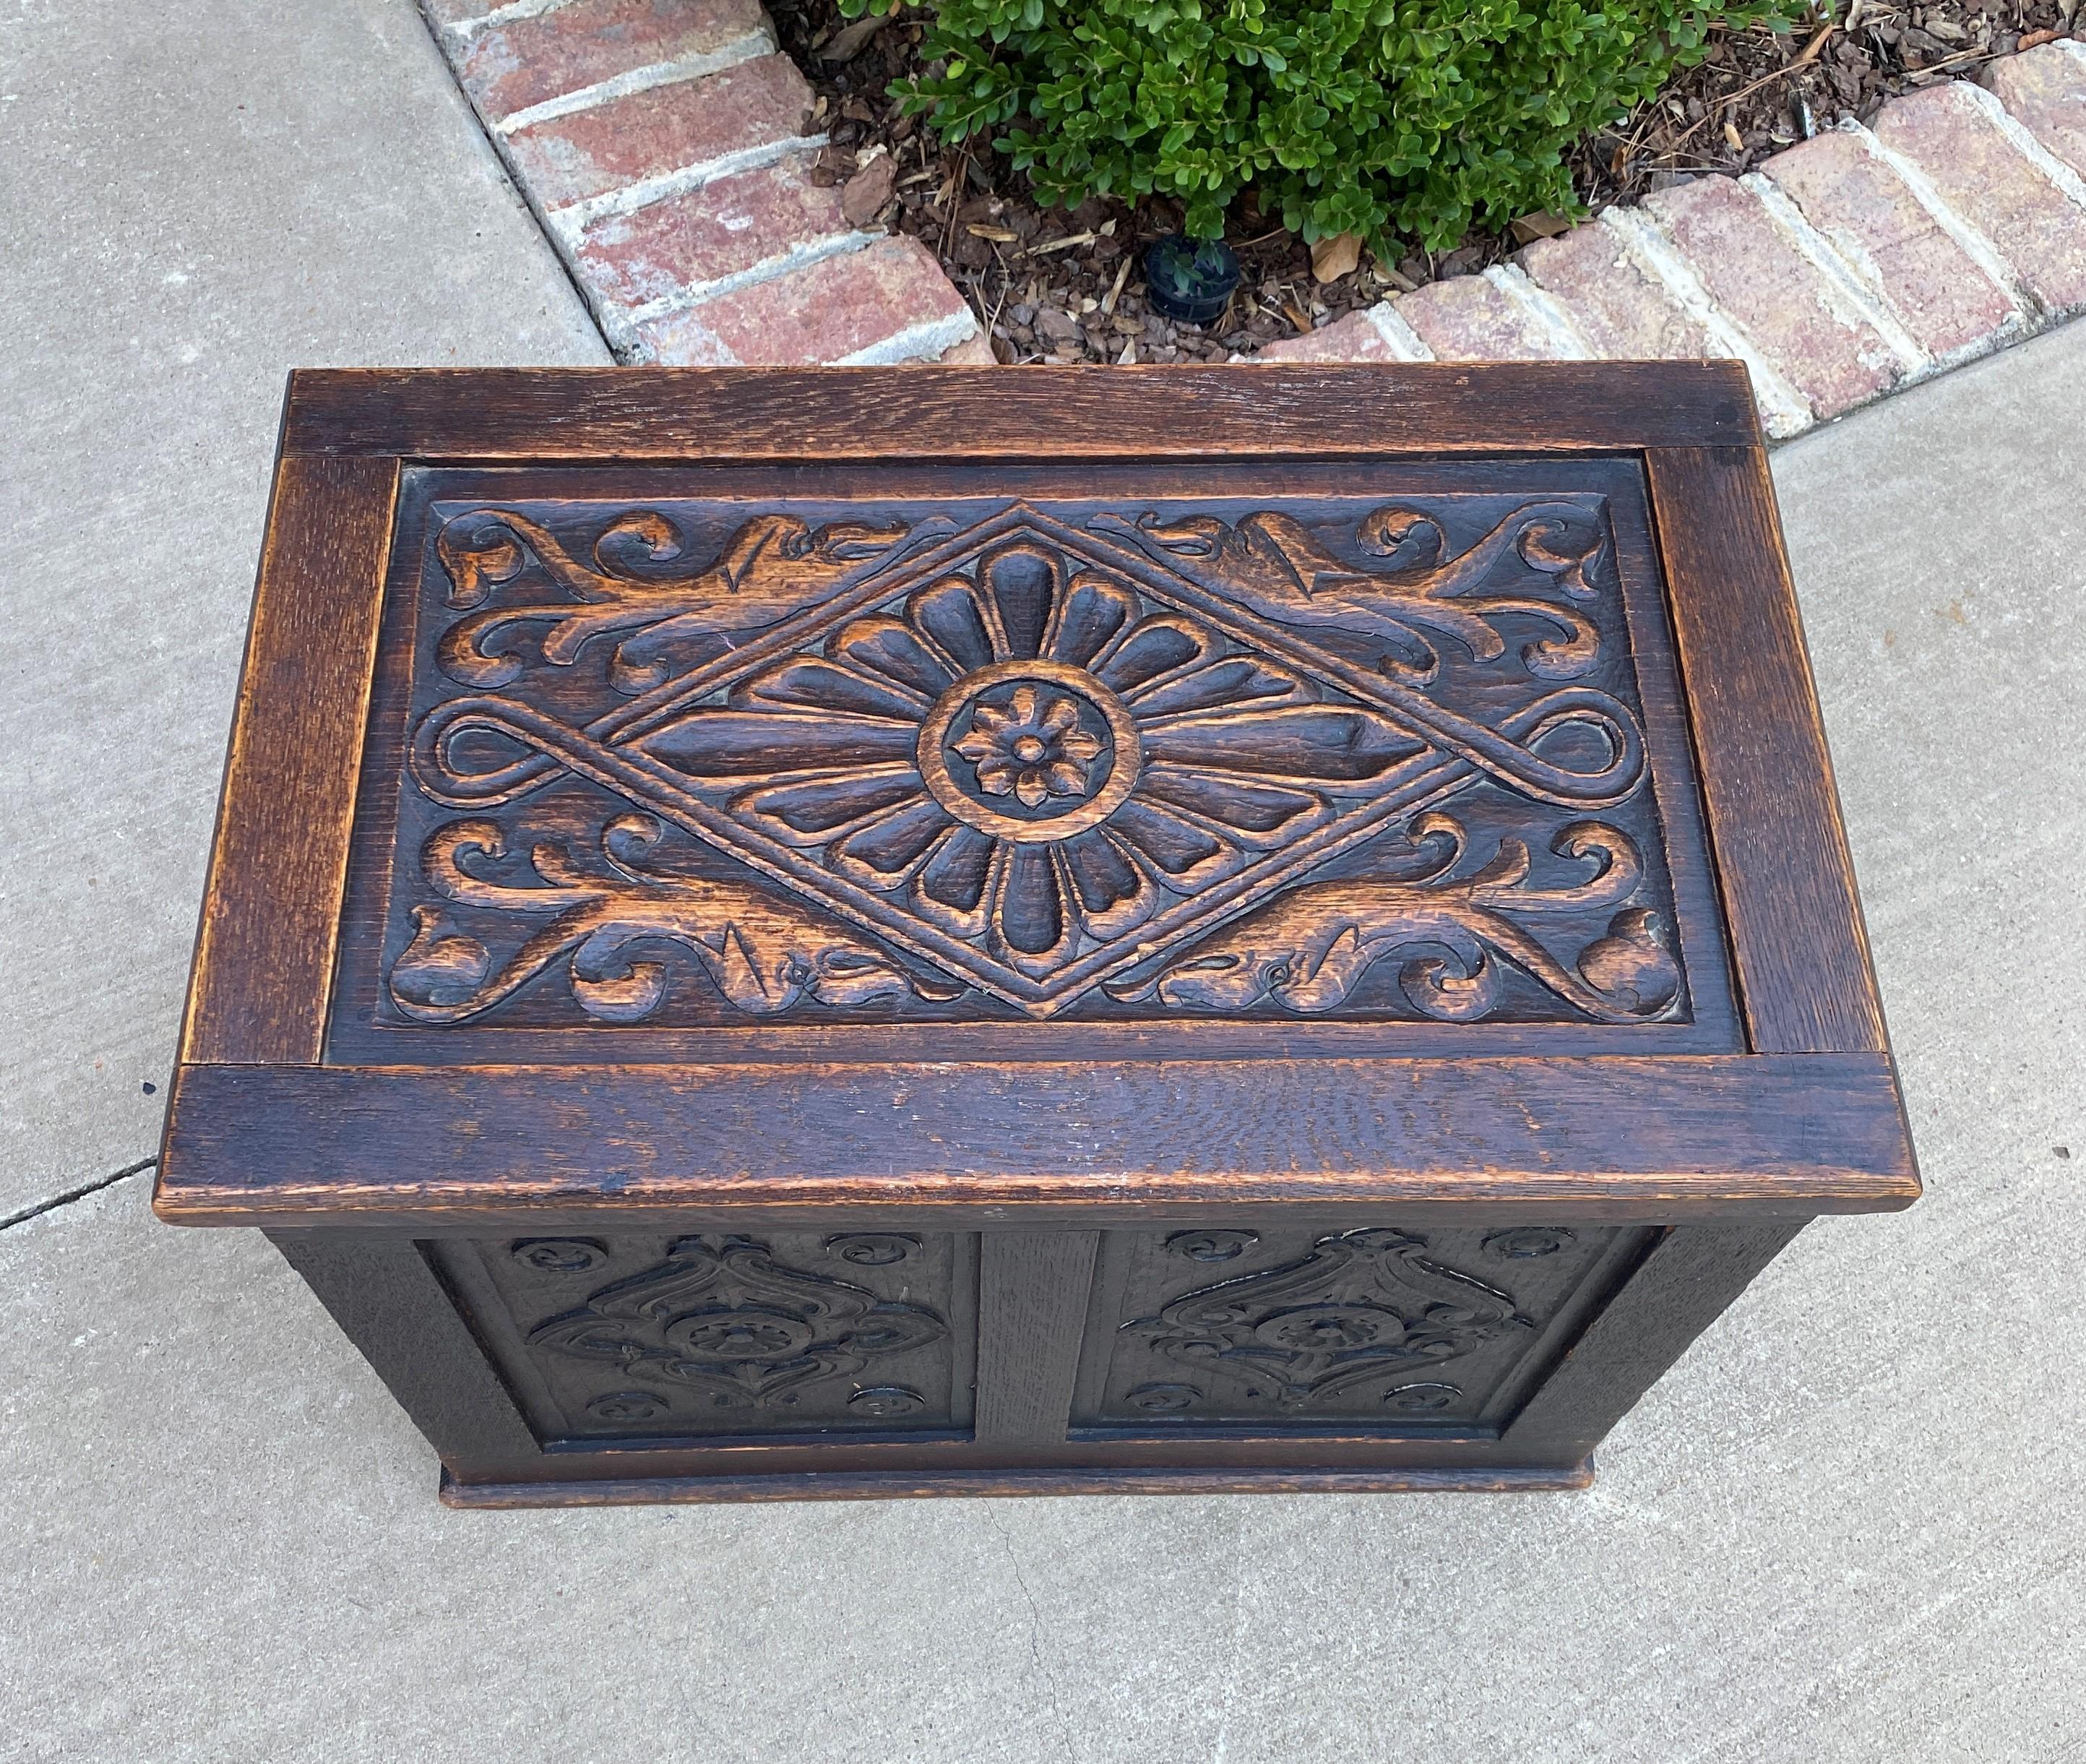 CHARMING Antique English HIGHLY CARVED Oak Blanket Box, Coffer, Trunk, Storage Chest or Bench~~PETITE SIZE

These chests were originally used as strongboxes for holding money, jewelry and other valuables~~the perfect size for storage of blankets